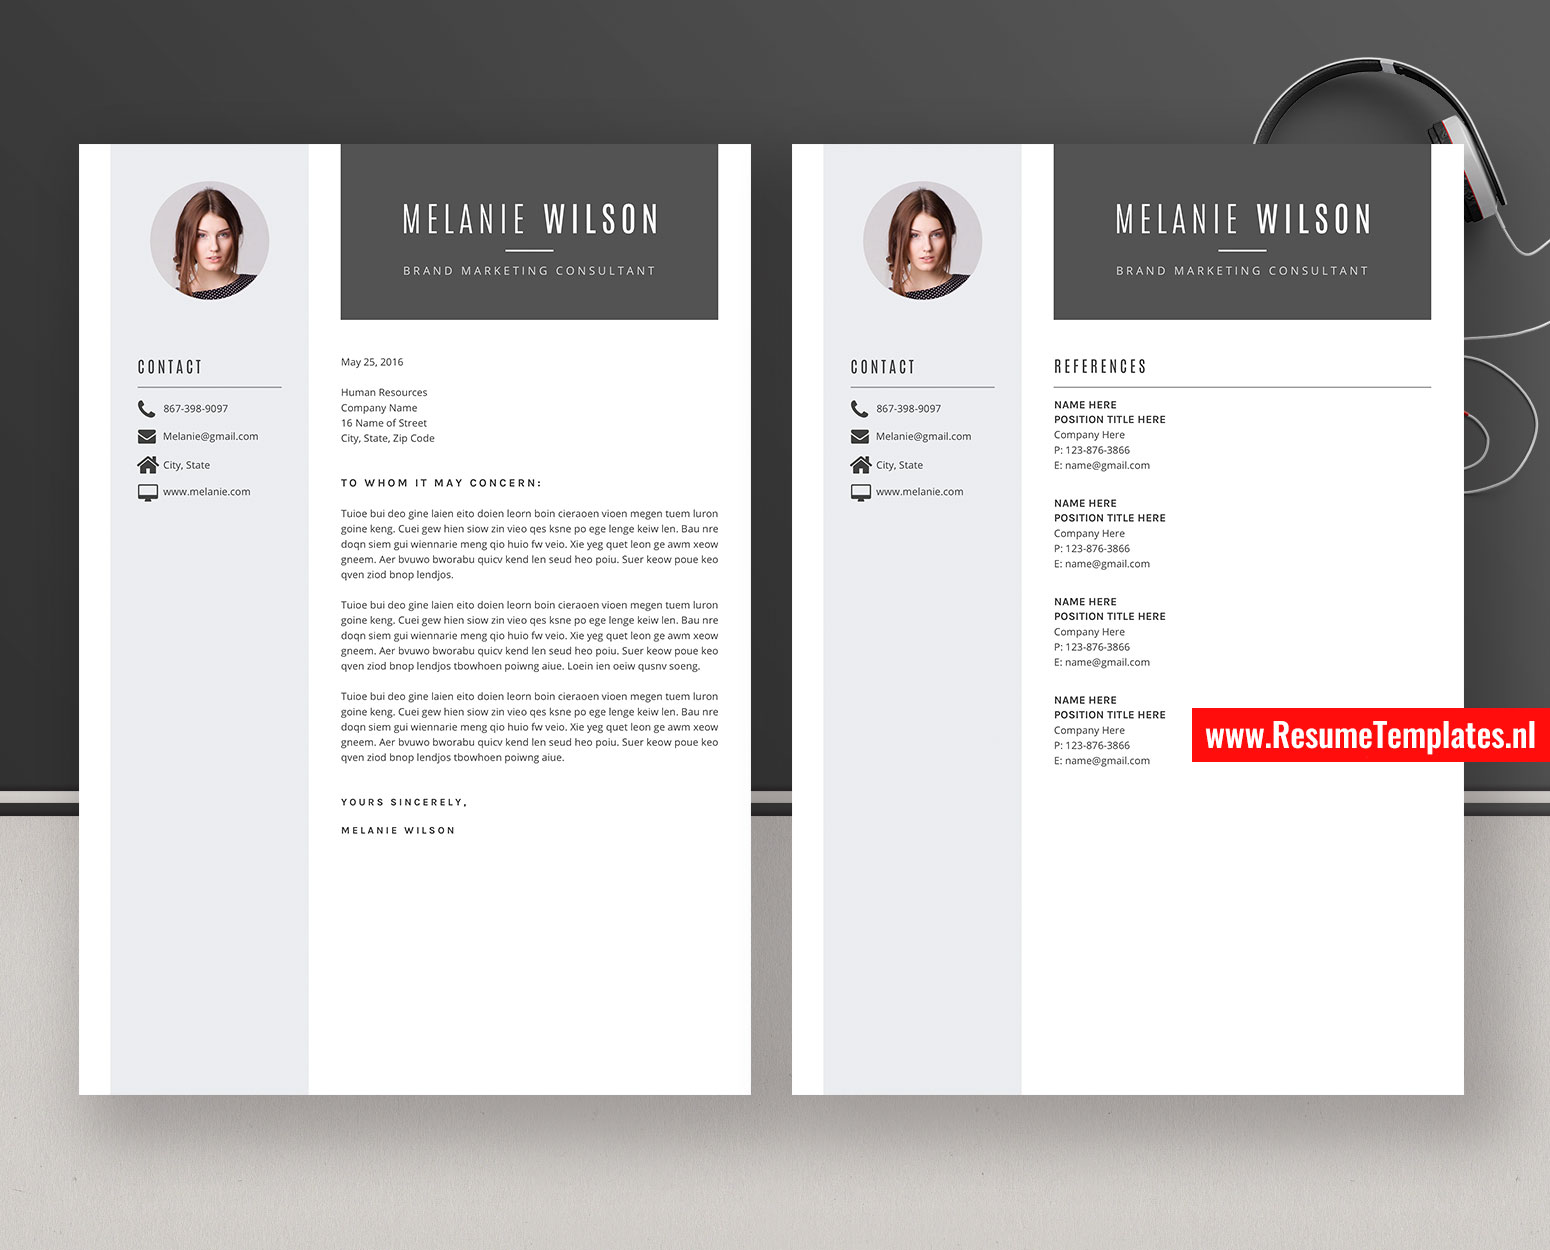 Modern Cv Template Resume Template For Ms Word Curriculum Vitae Cover Letter References Professional And Creative Resume Teacher Resume 1 Page 2 Page 3 Page Resume Instant Download Resumetemplates Nl